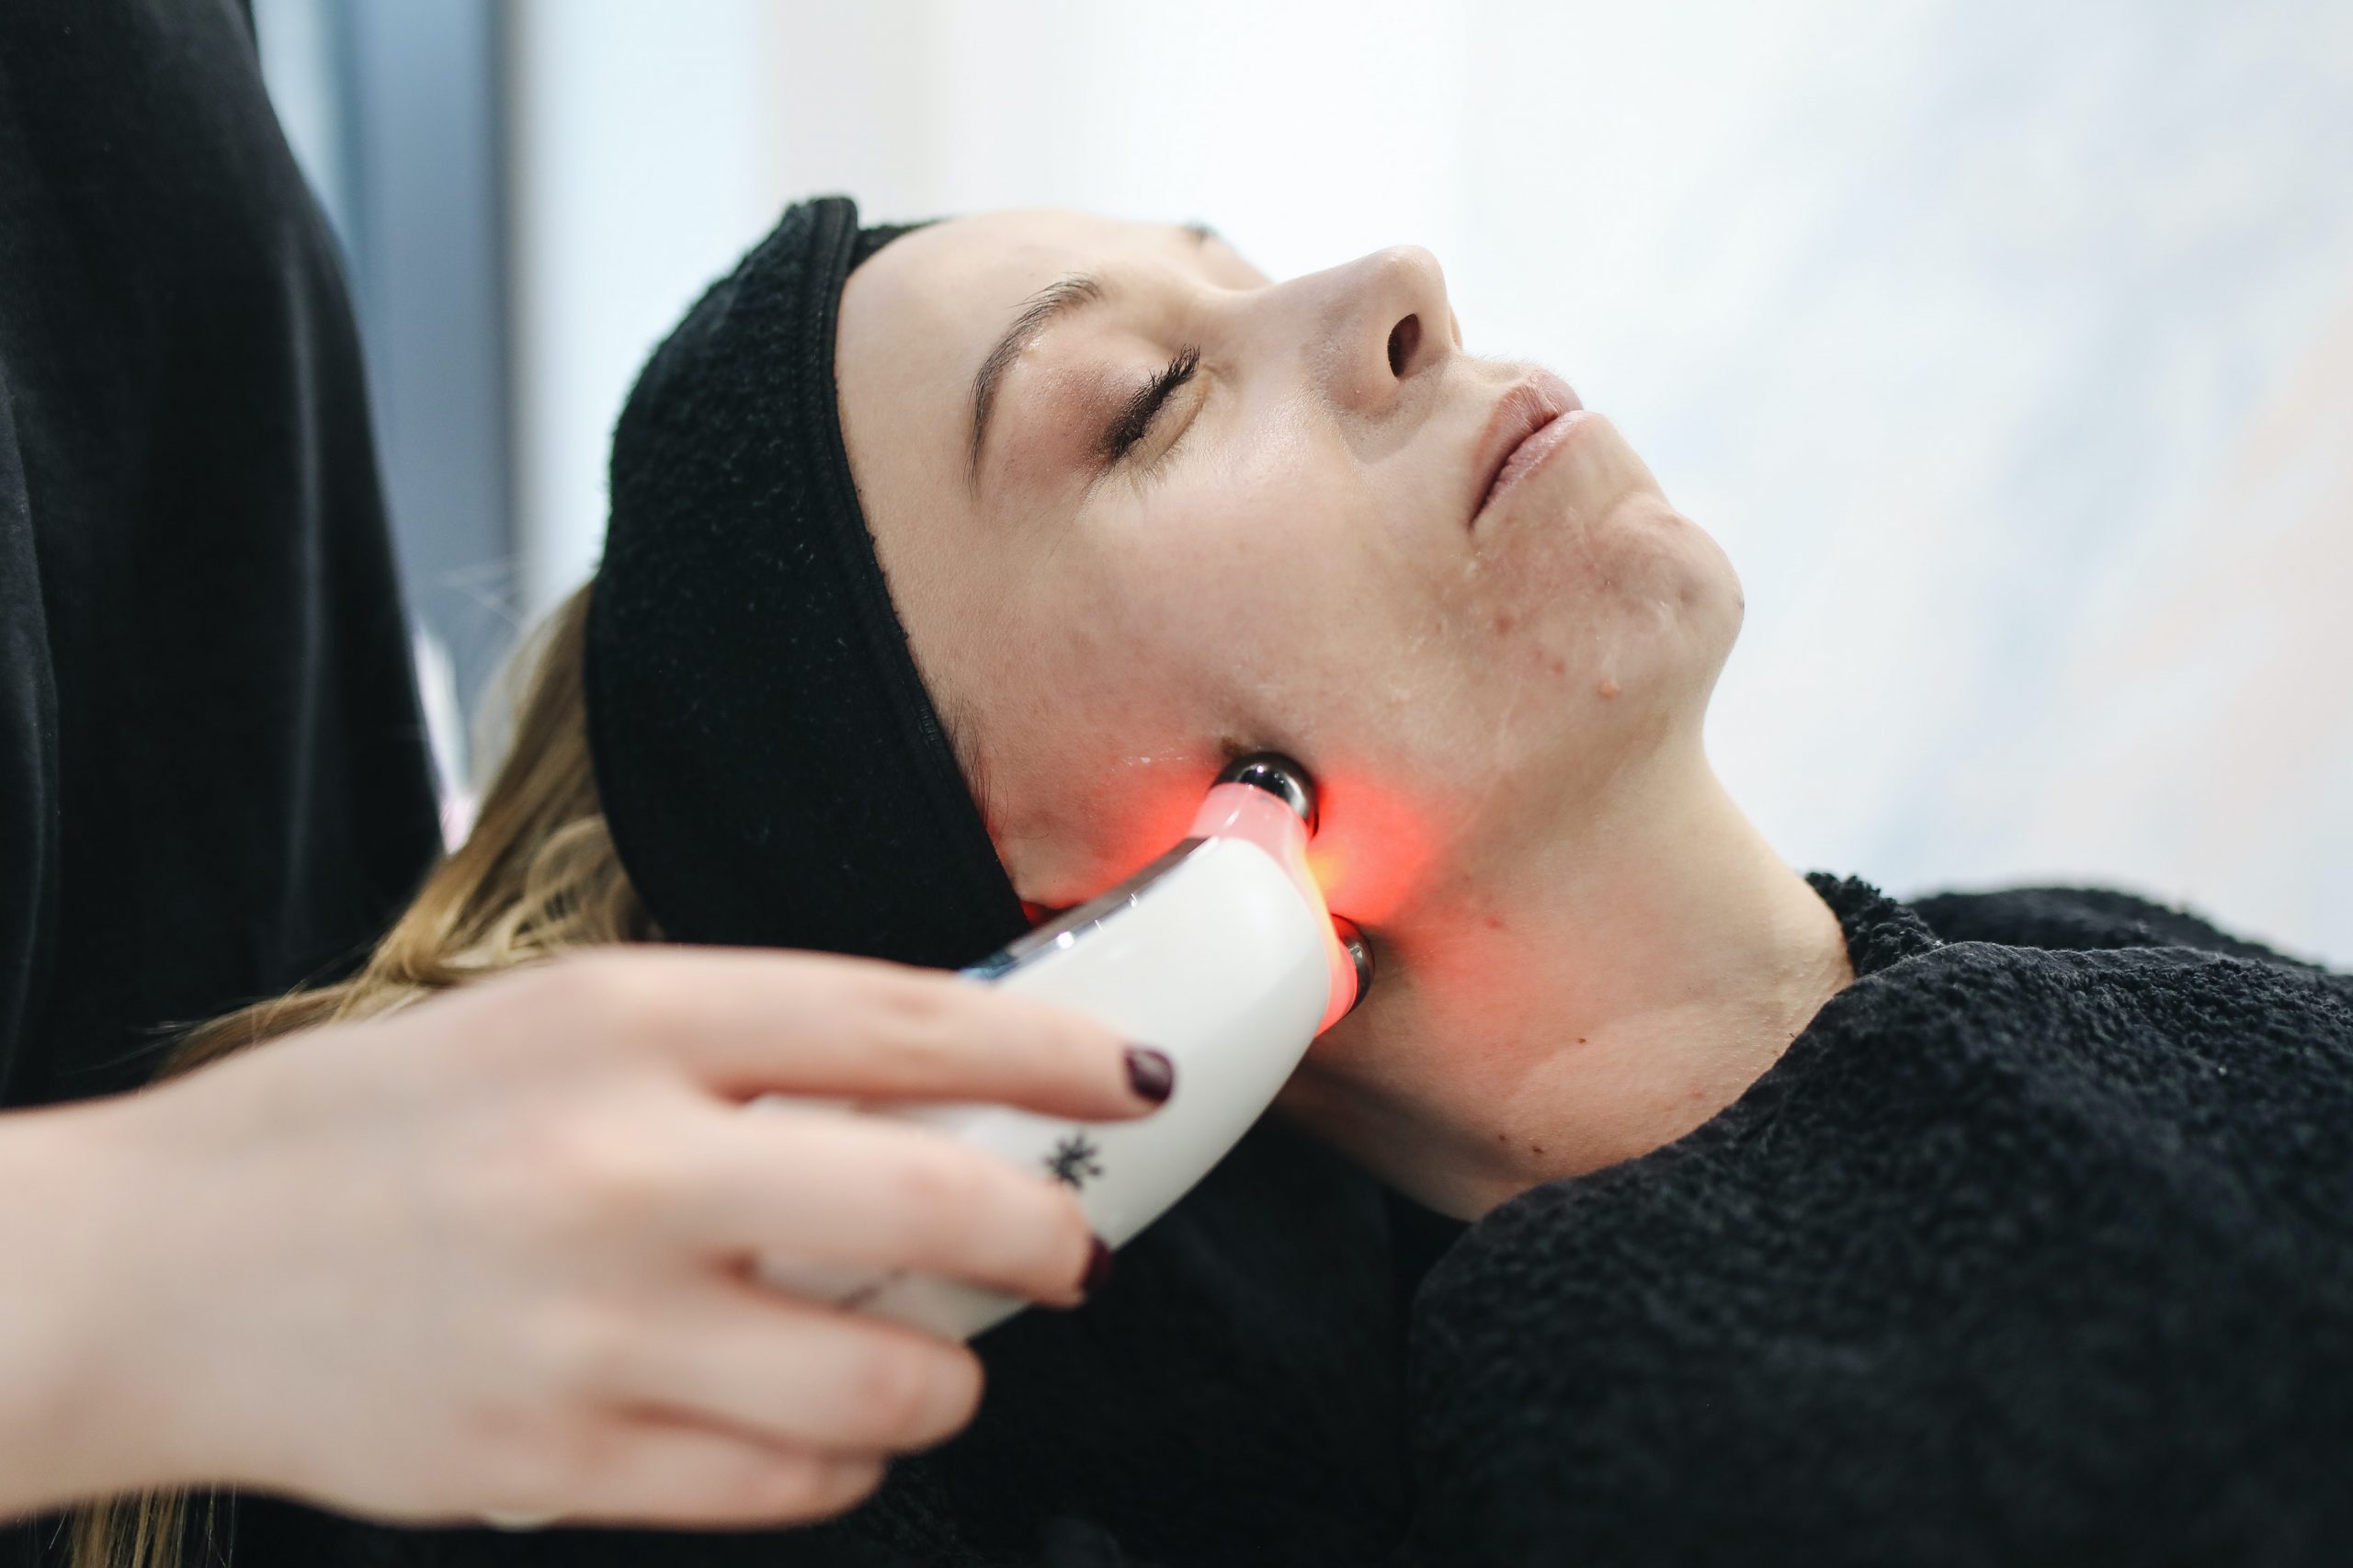 A woman undergoes treatment with the NuFACE Trinity, a facial toning device.